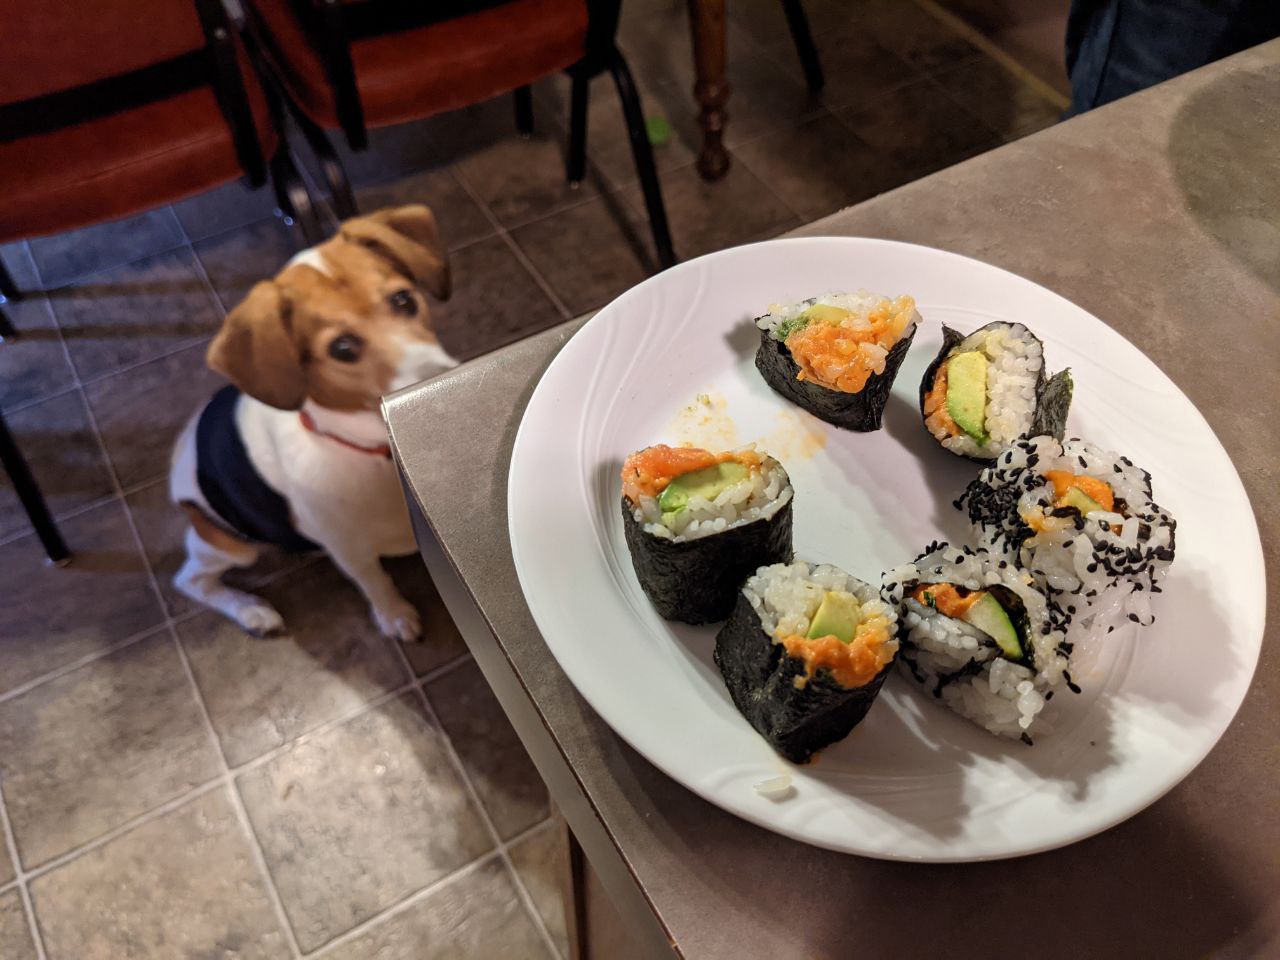 Togo staring at a plate of spicy tuna rolls.